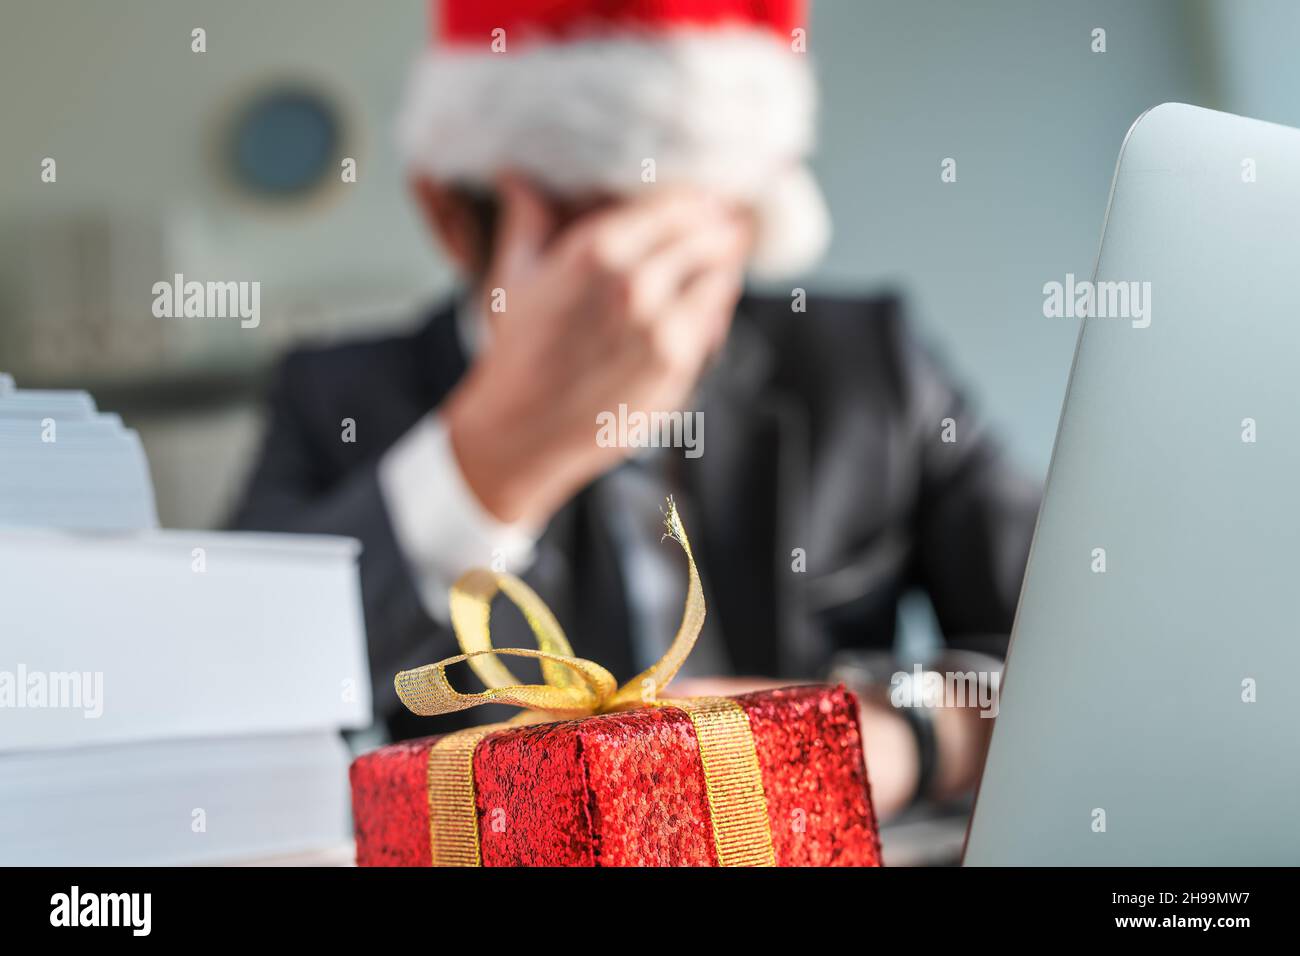 Sad and unhappy businessman with Santa Claus hat crying in office during Christmas holiday season, wrapped present on the desk with selective focus Stock Photo